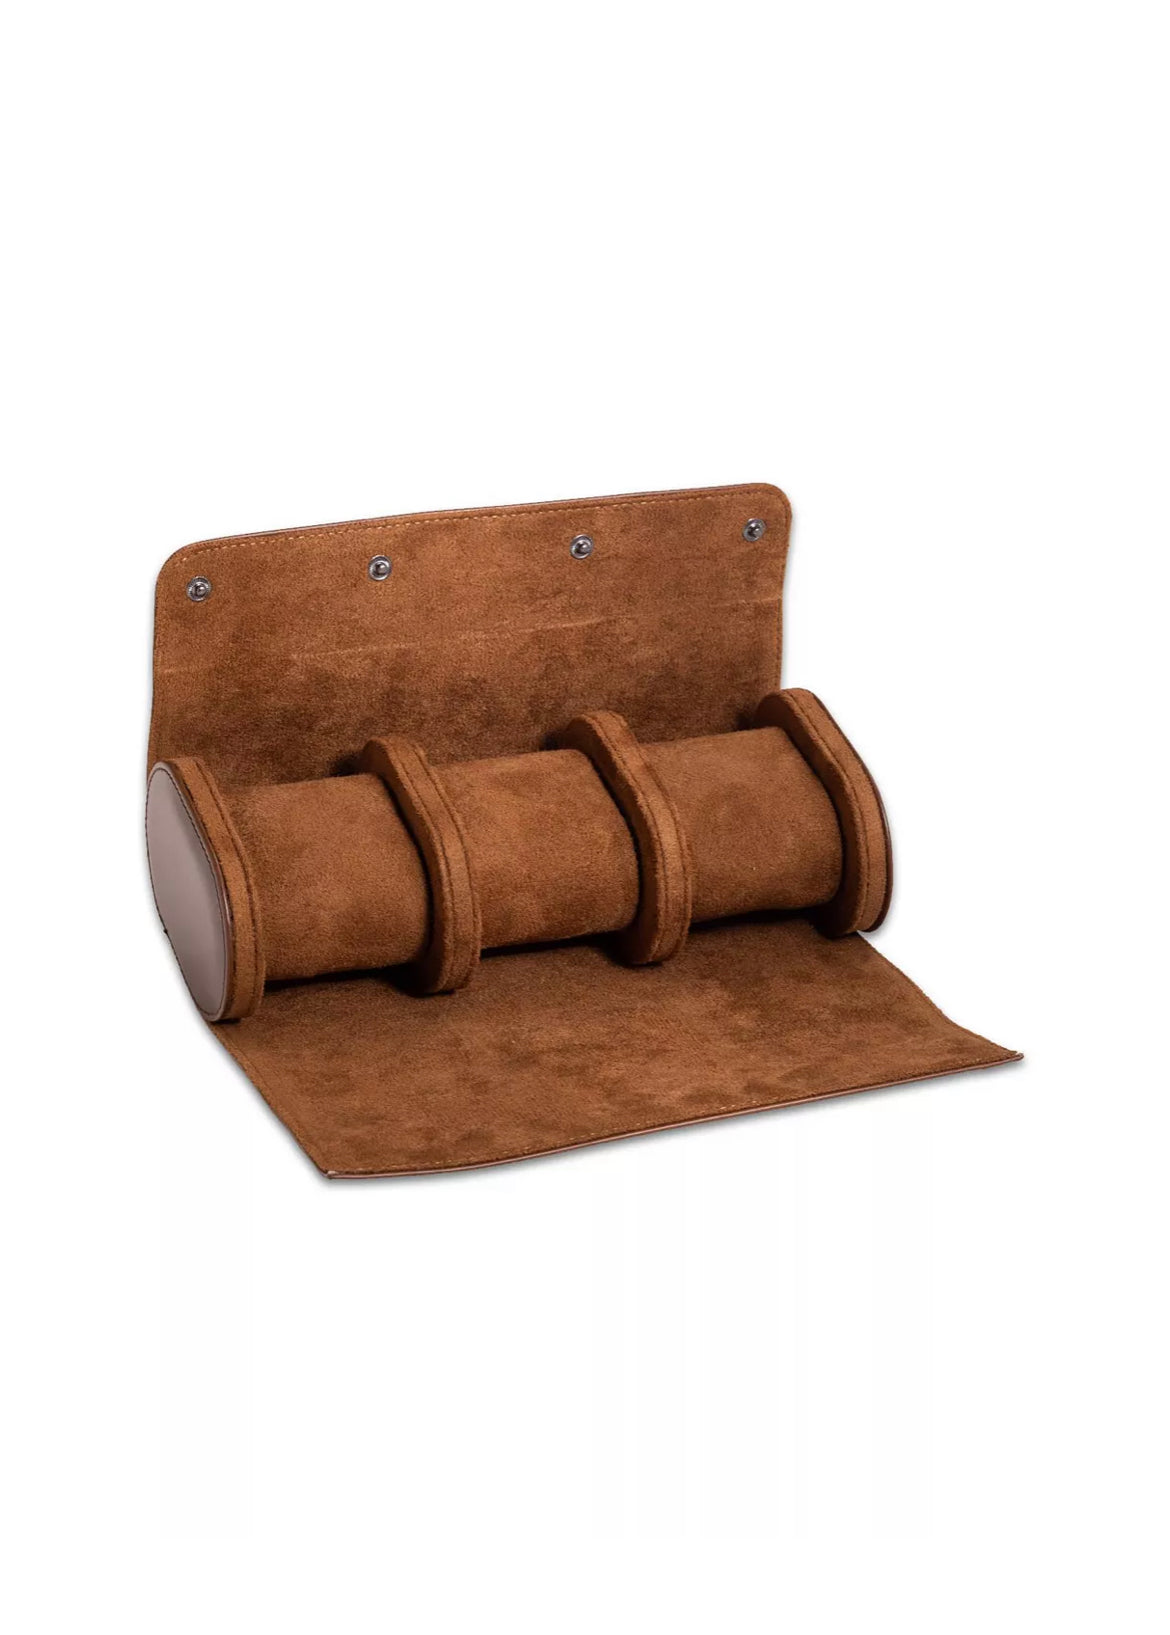 Leather watch holder for 3